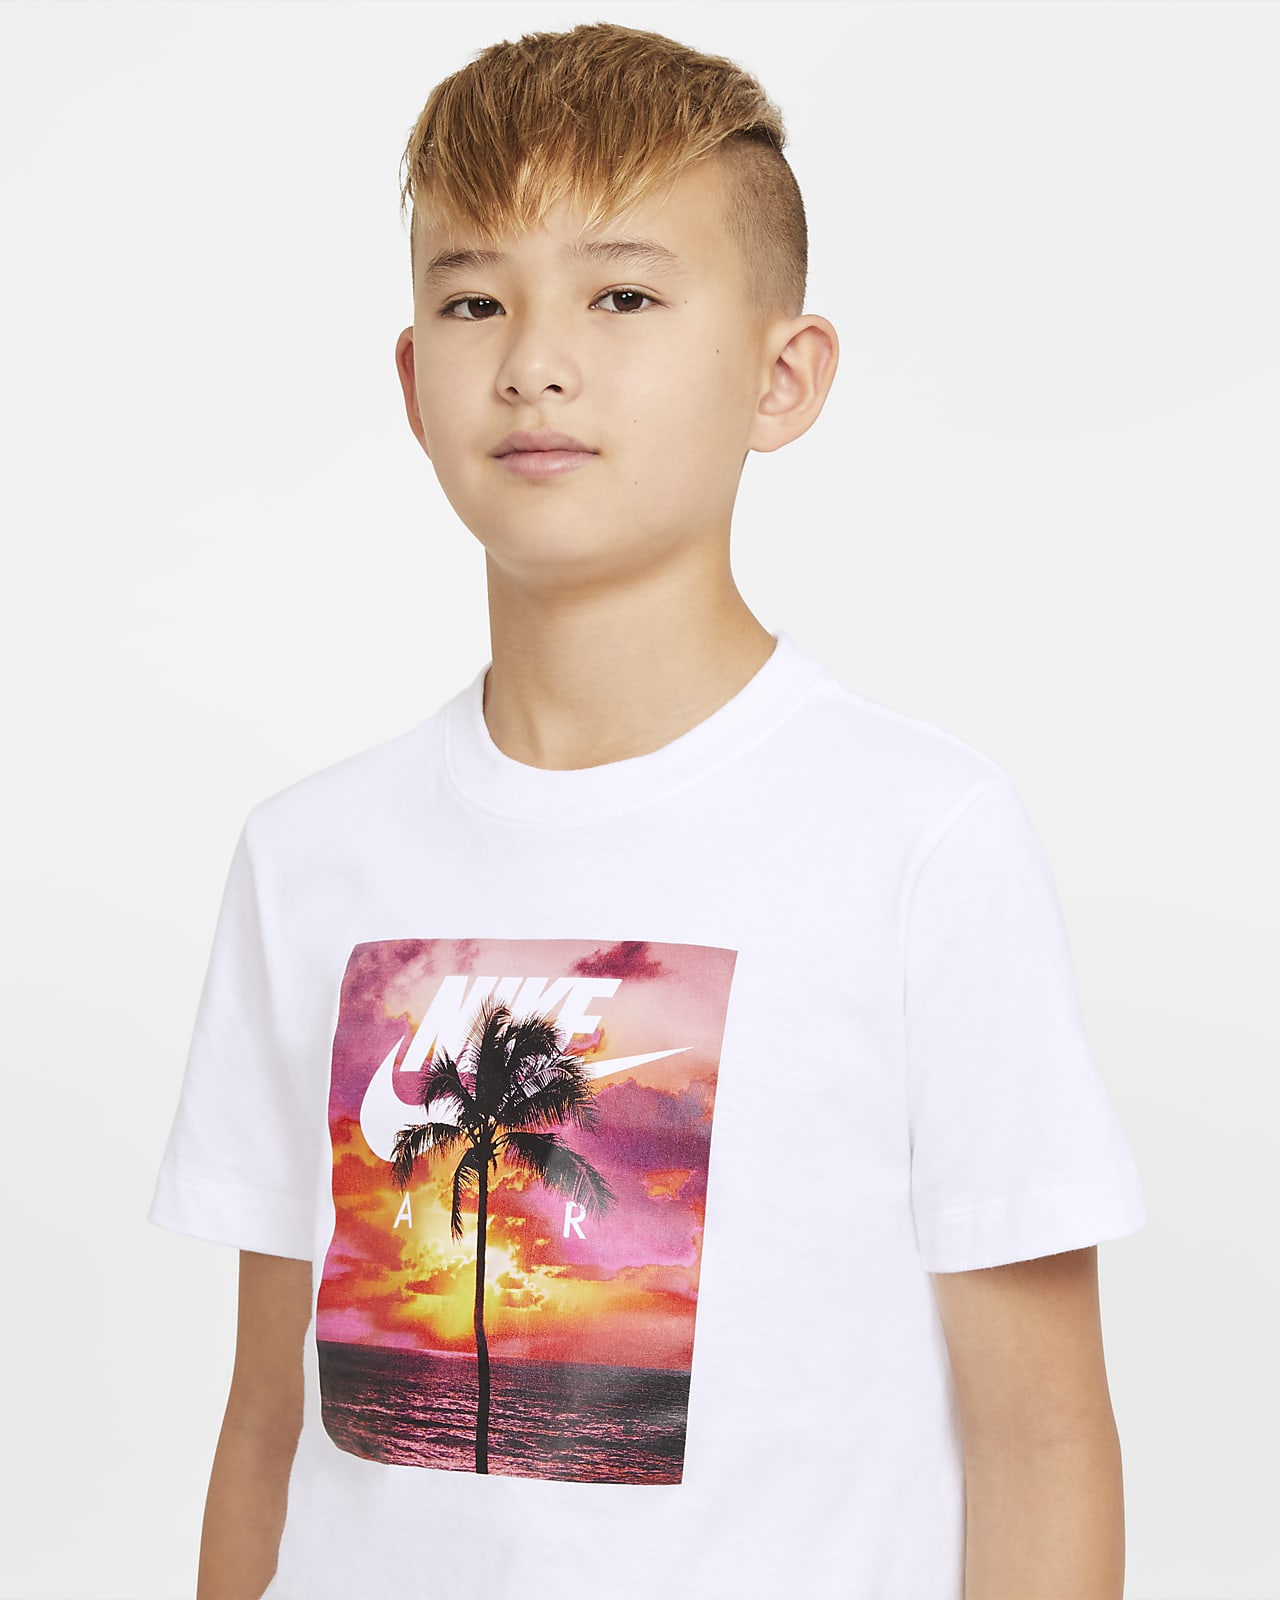 nike shirt with palm trees